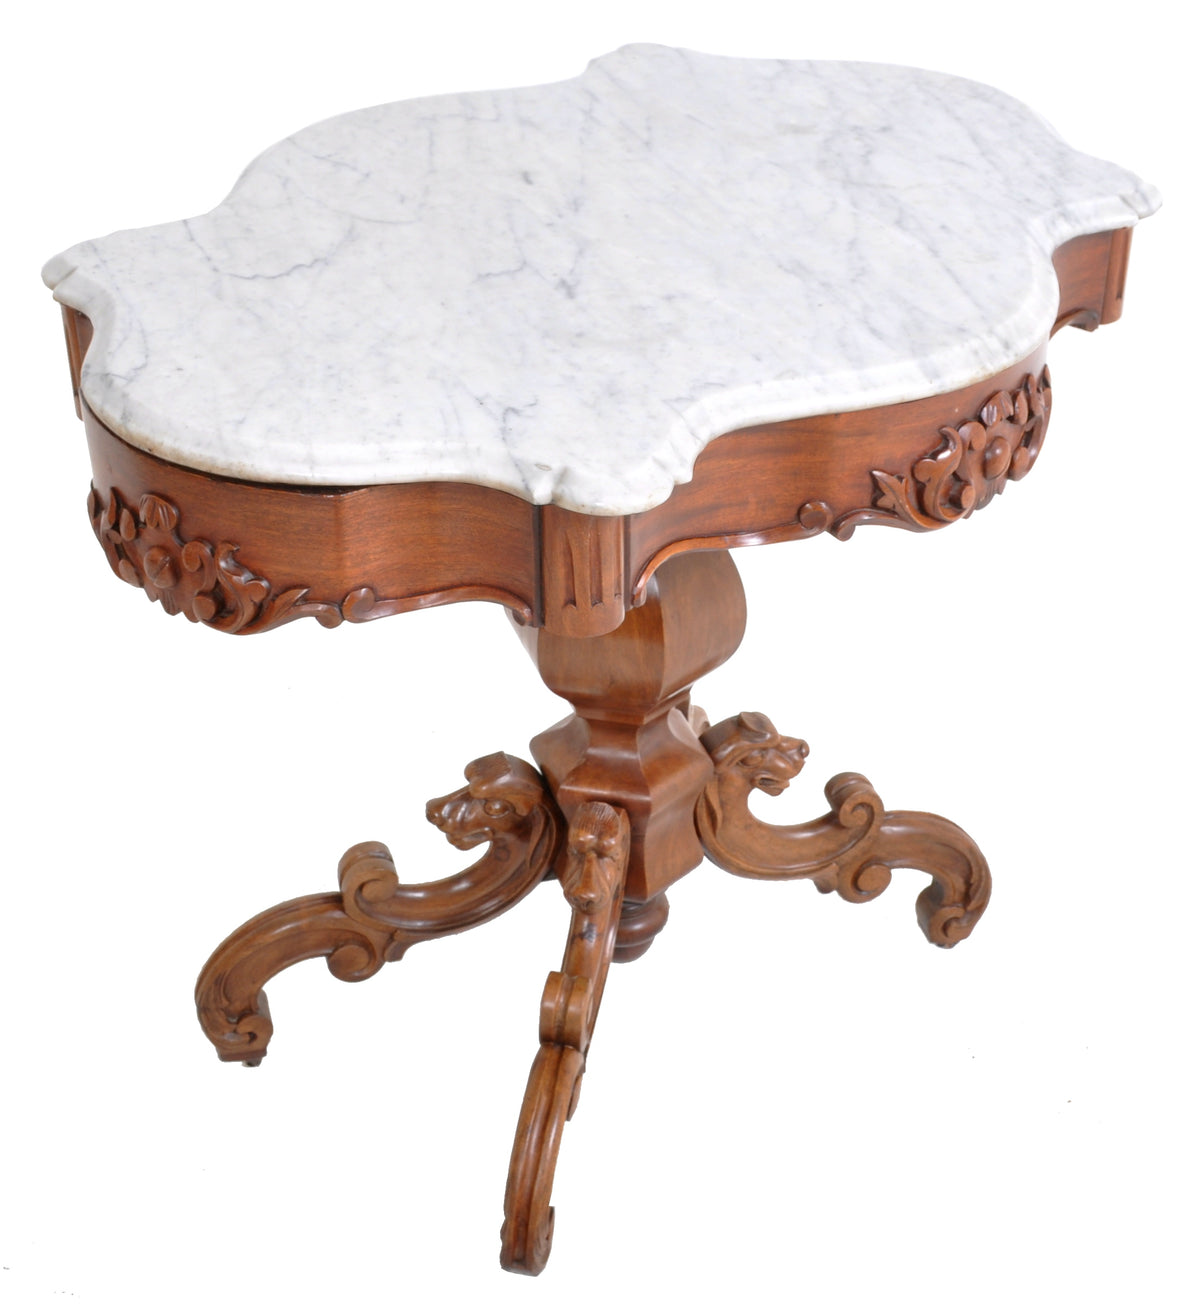 Antique American Victorian Walnut Marble Top Parlor Table, Possibly Belter or Meeks, circa 1860